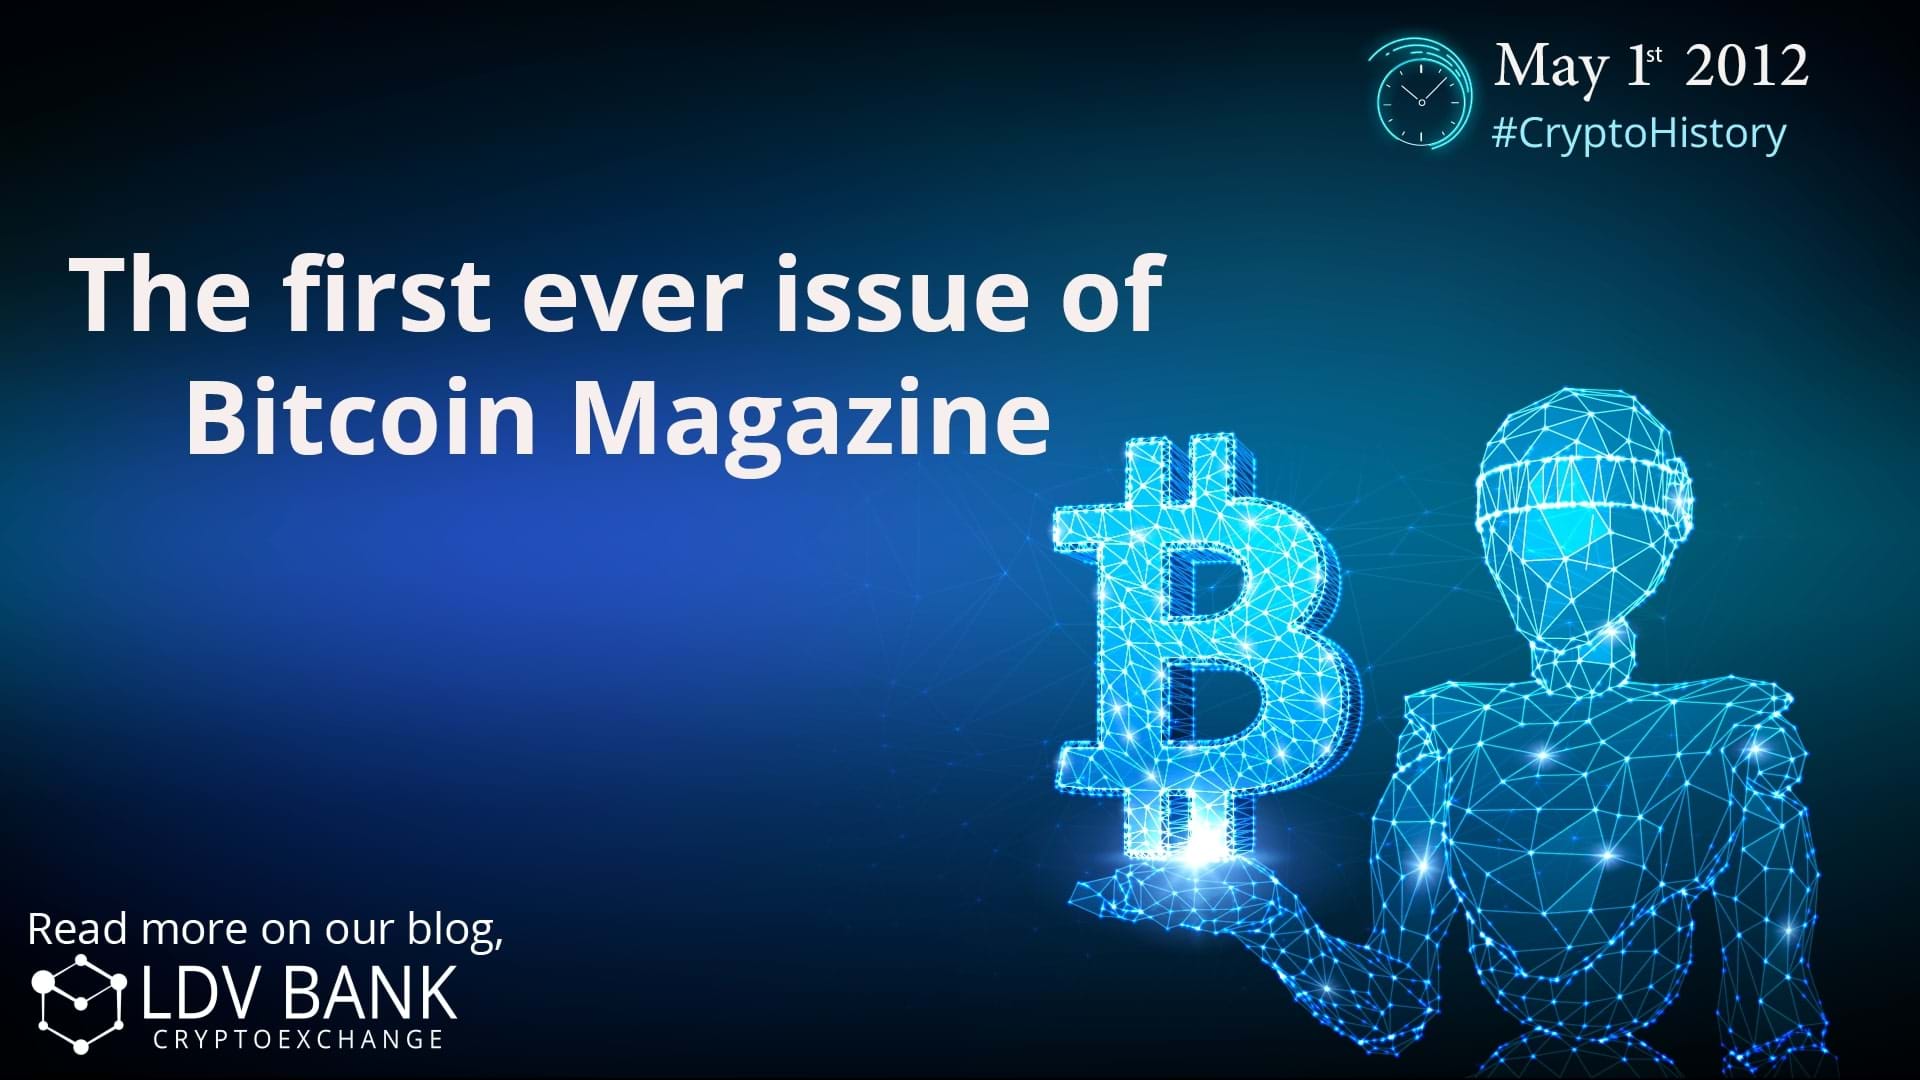 Do you know who the founder of Bitcoin Magazine is?